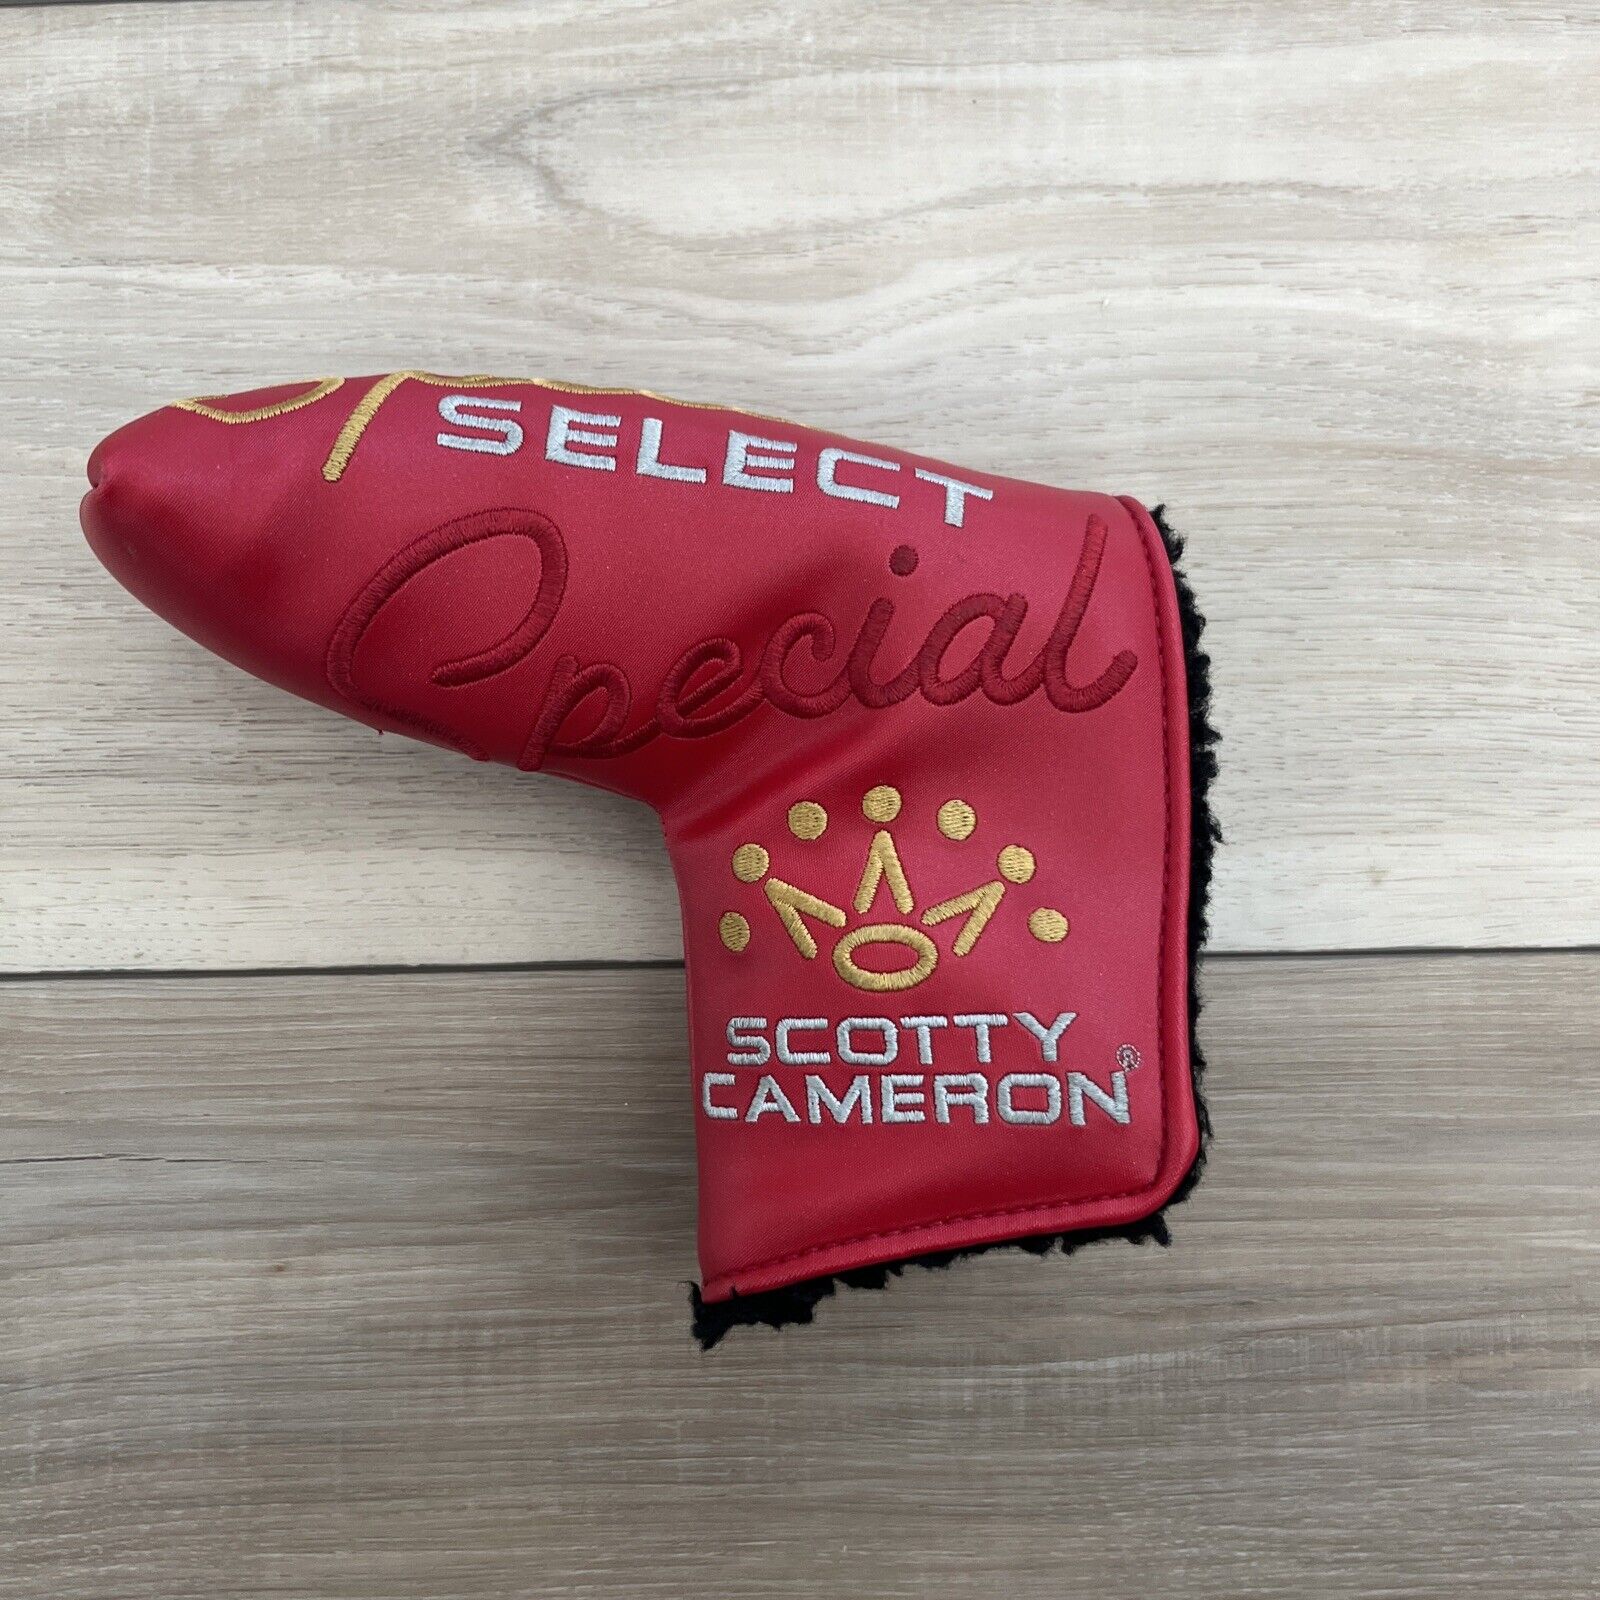 SCOTTY CAMERON SPECIAL SELECT NEWPORT BLADE PUTTER HEADCOVER COVER